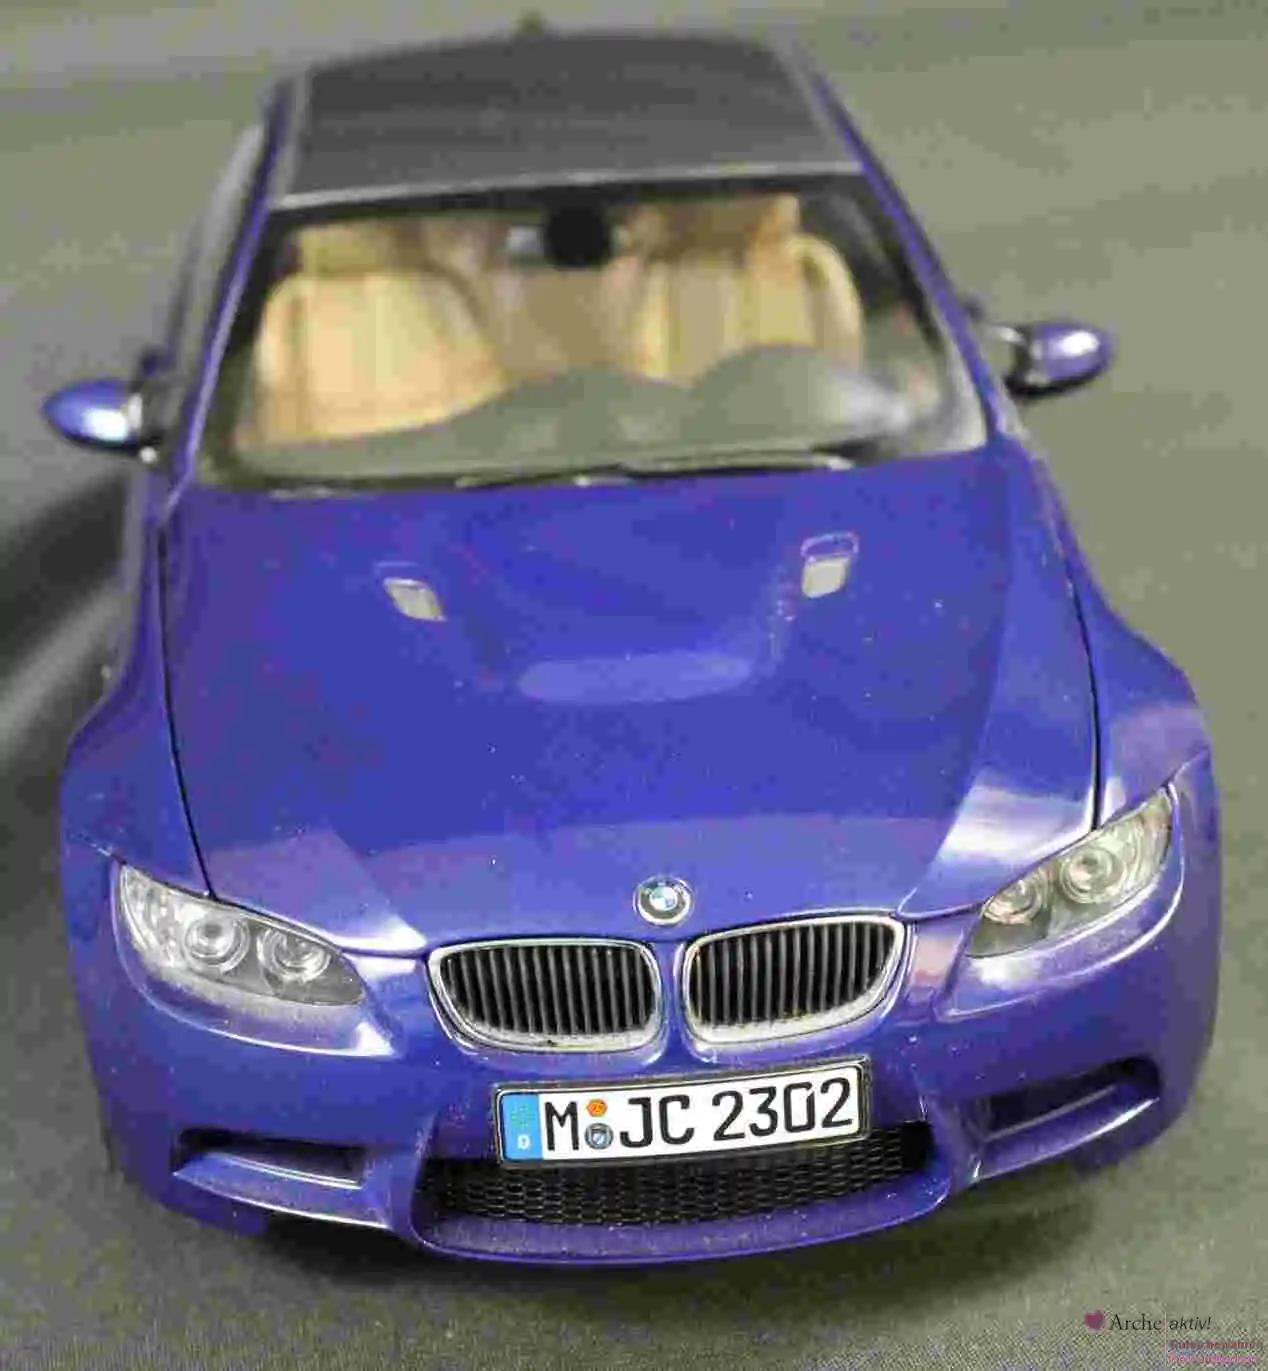 Modellauto BMW M3 Coupe - Kyosho - Maßstab 1:18 - Top Zustand - OVP 